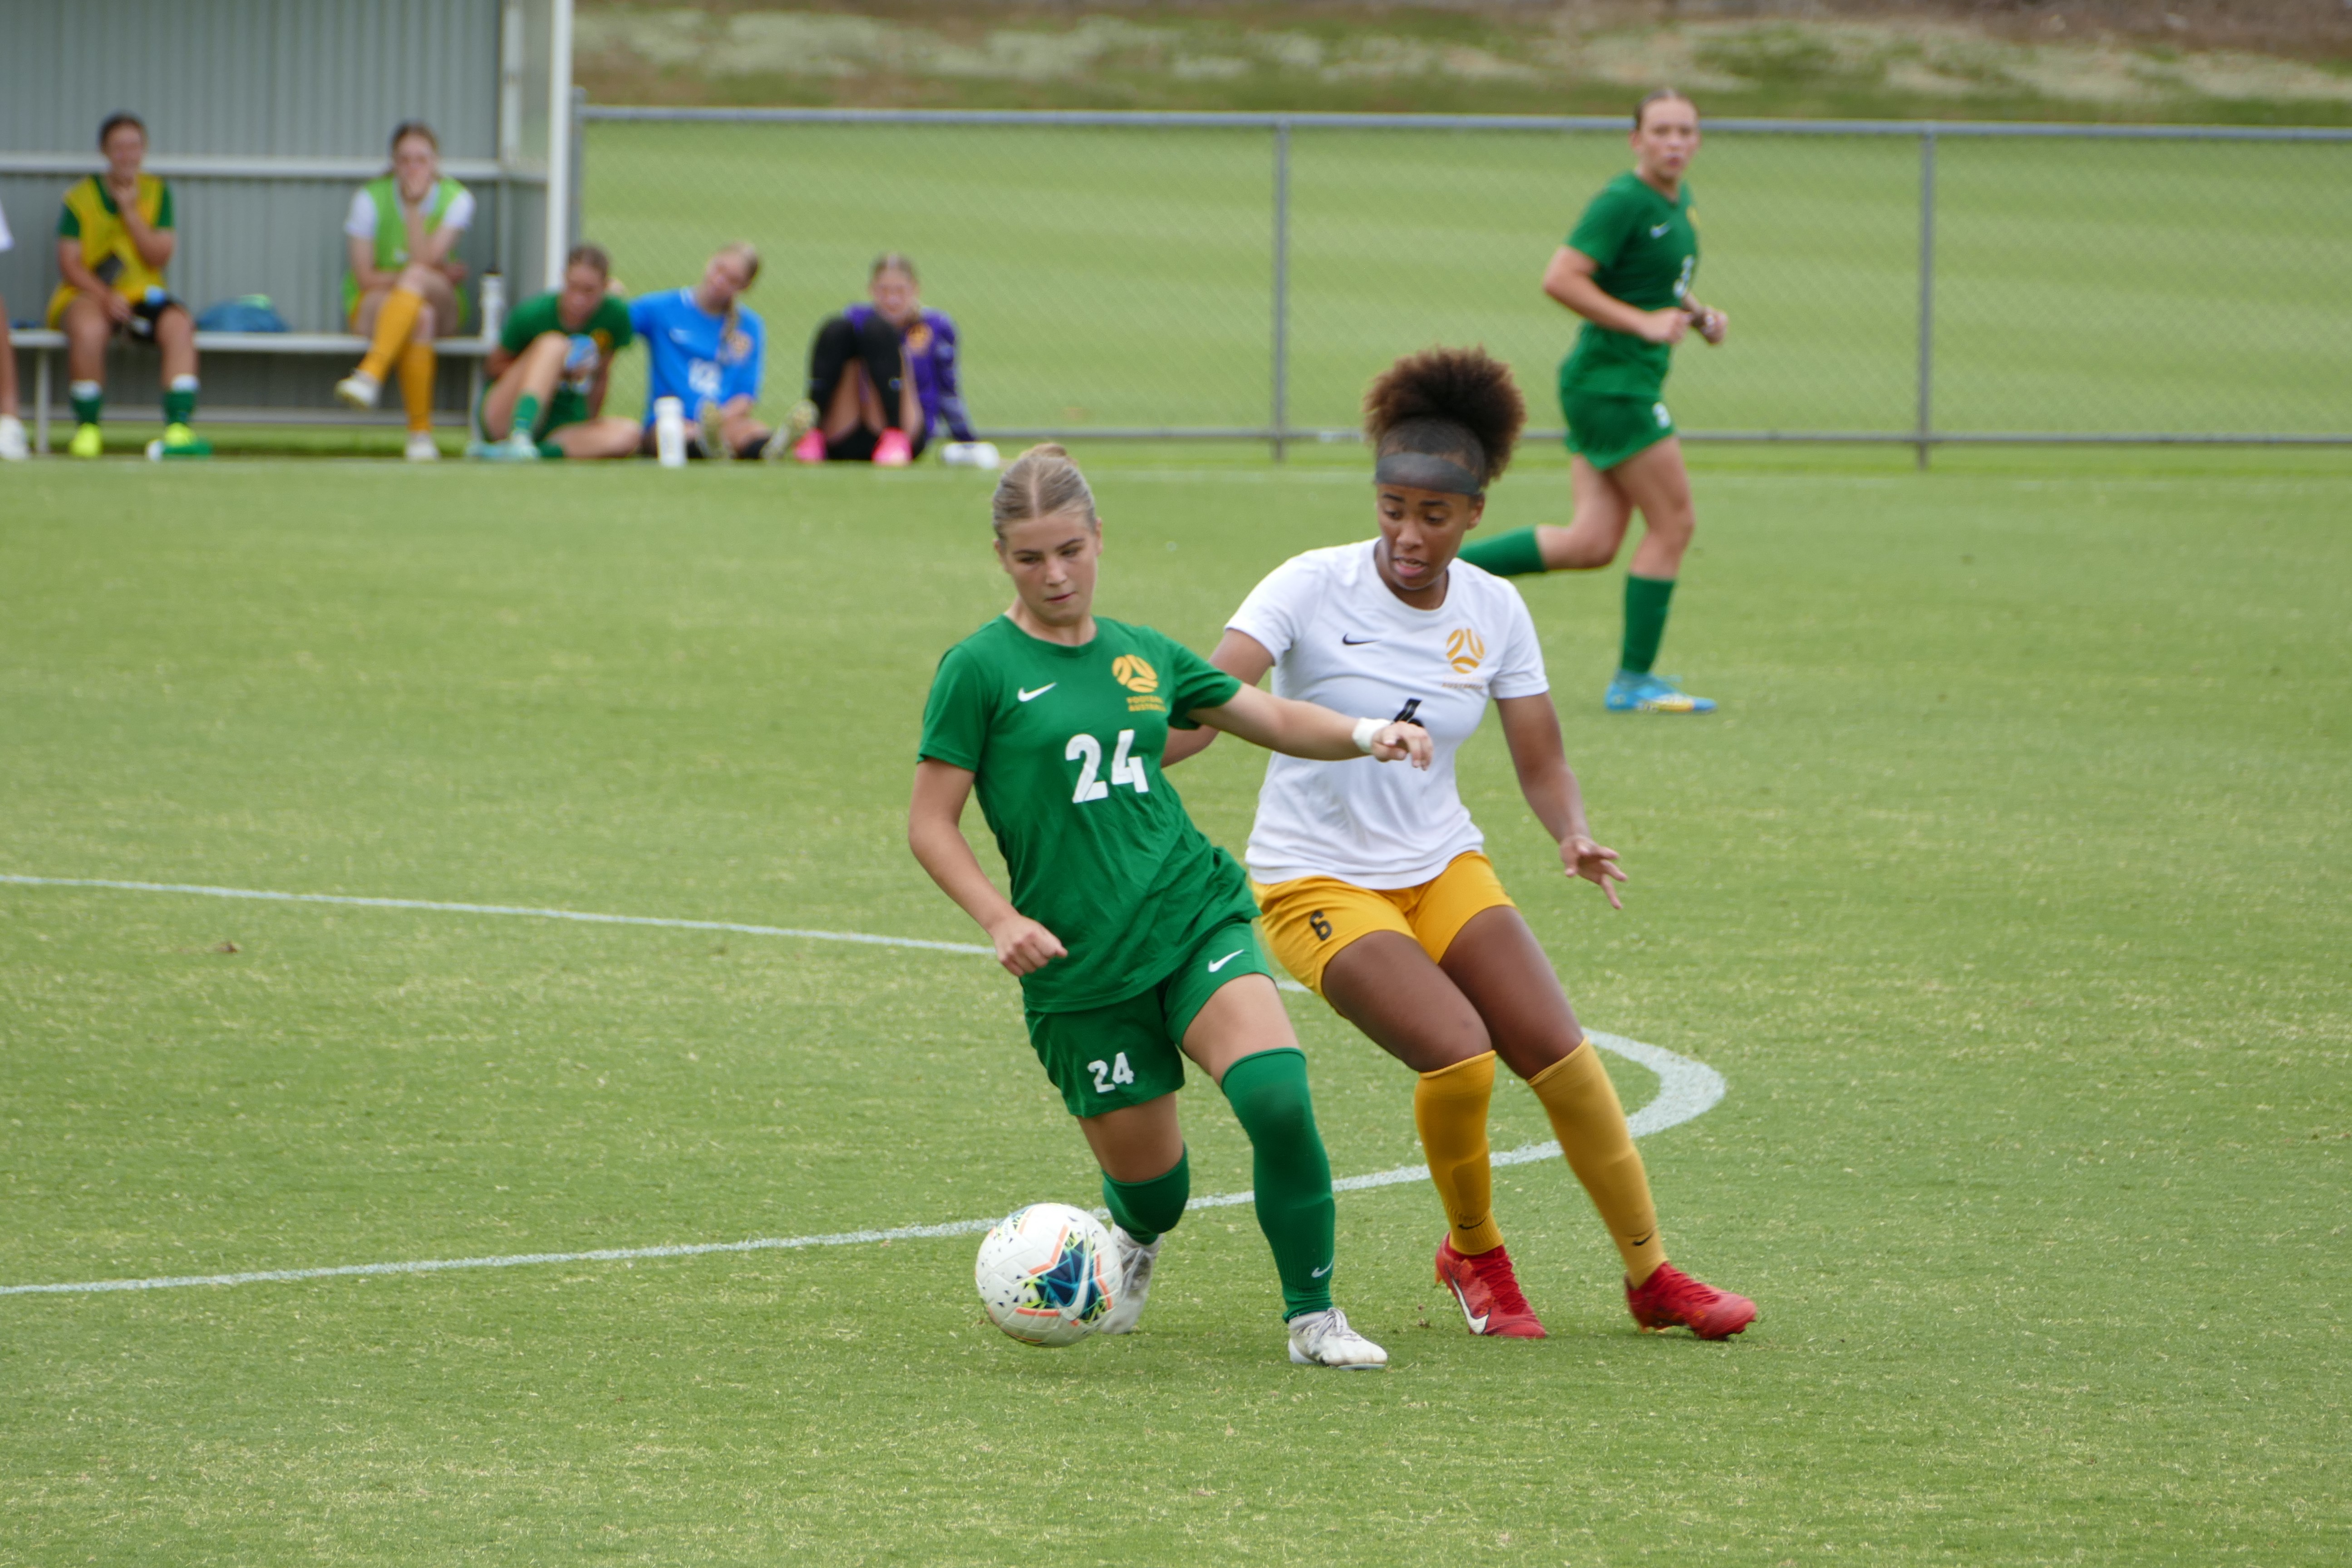 Two Junior Matildas players battling for the ball during a match